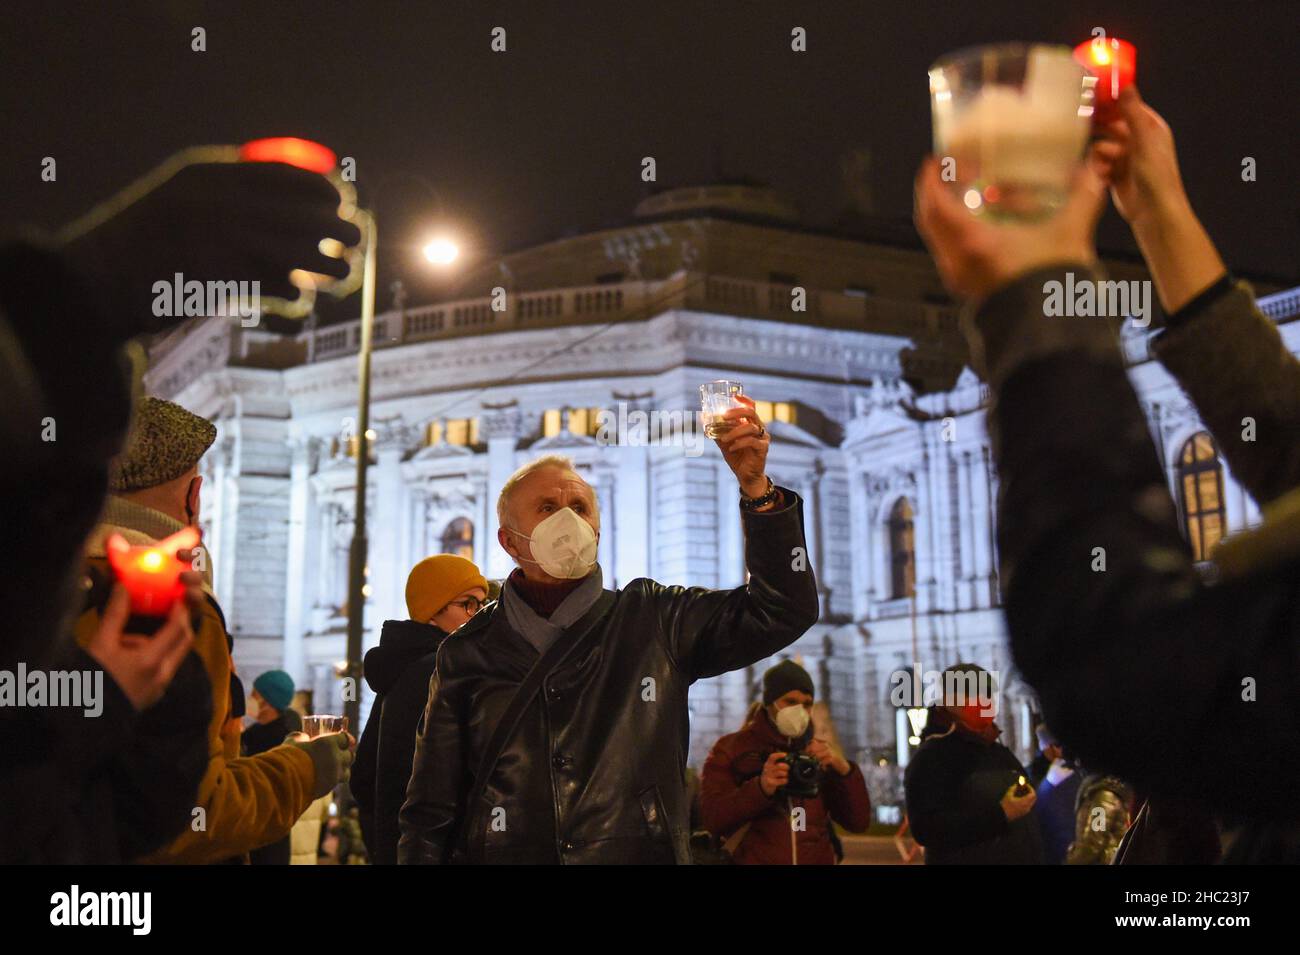 (211219) -- VIENNA, Dec. 19, 2021 (Xinhua) -- People hold candles to mourn the victims of COVID-19 during an event in Vienna, Austria, Dec. 19, 2021. A commemorative event was held here on Sunday to mourn the 13000 lives lost to COVID-19 in Austria. (Xinhua/Guo Chen) Stock Photo